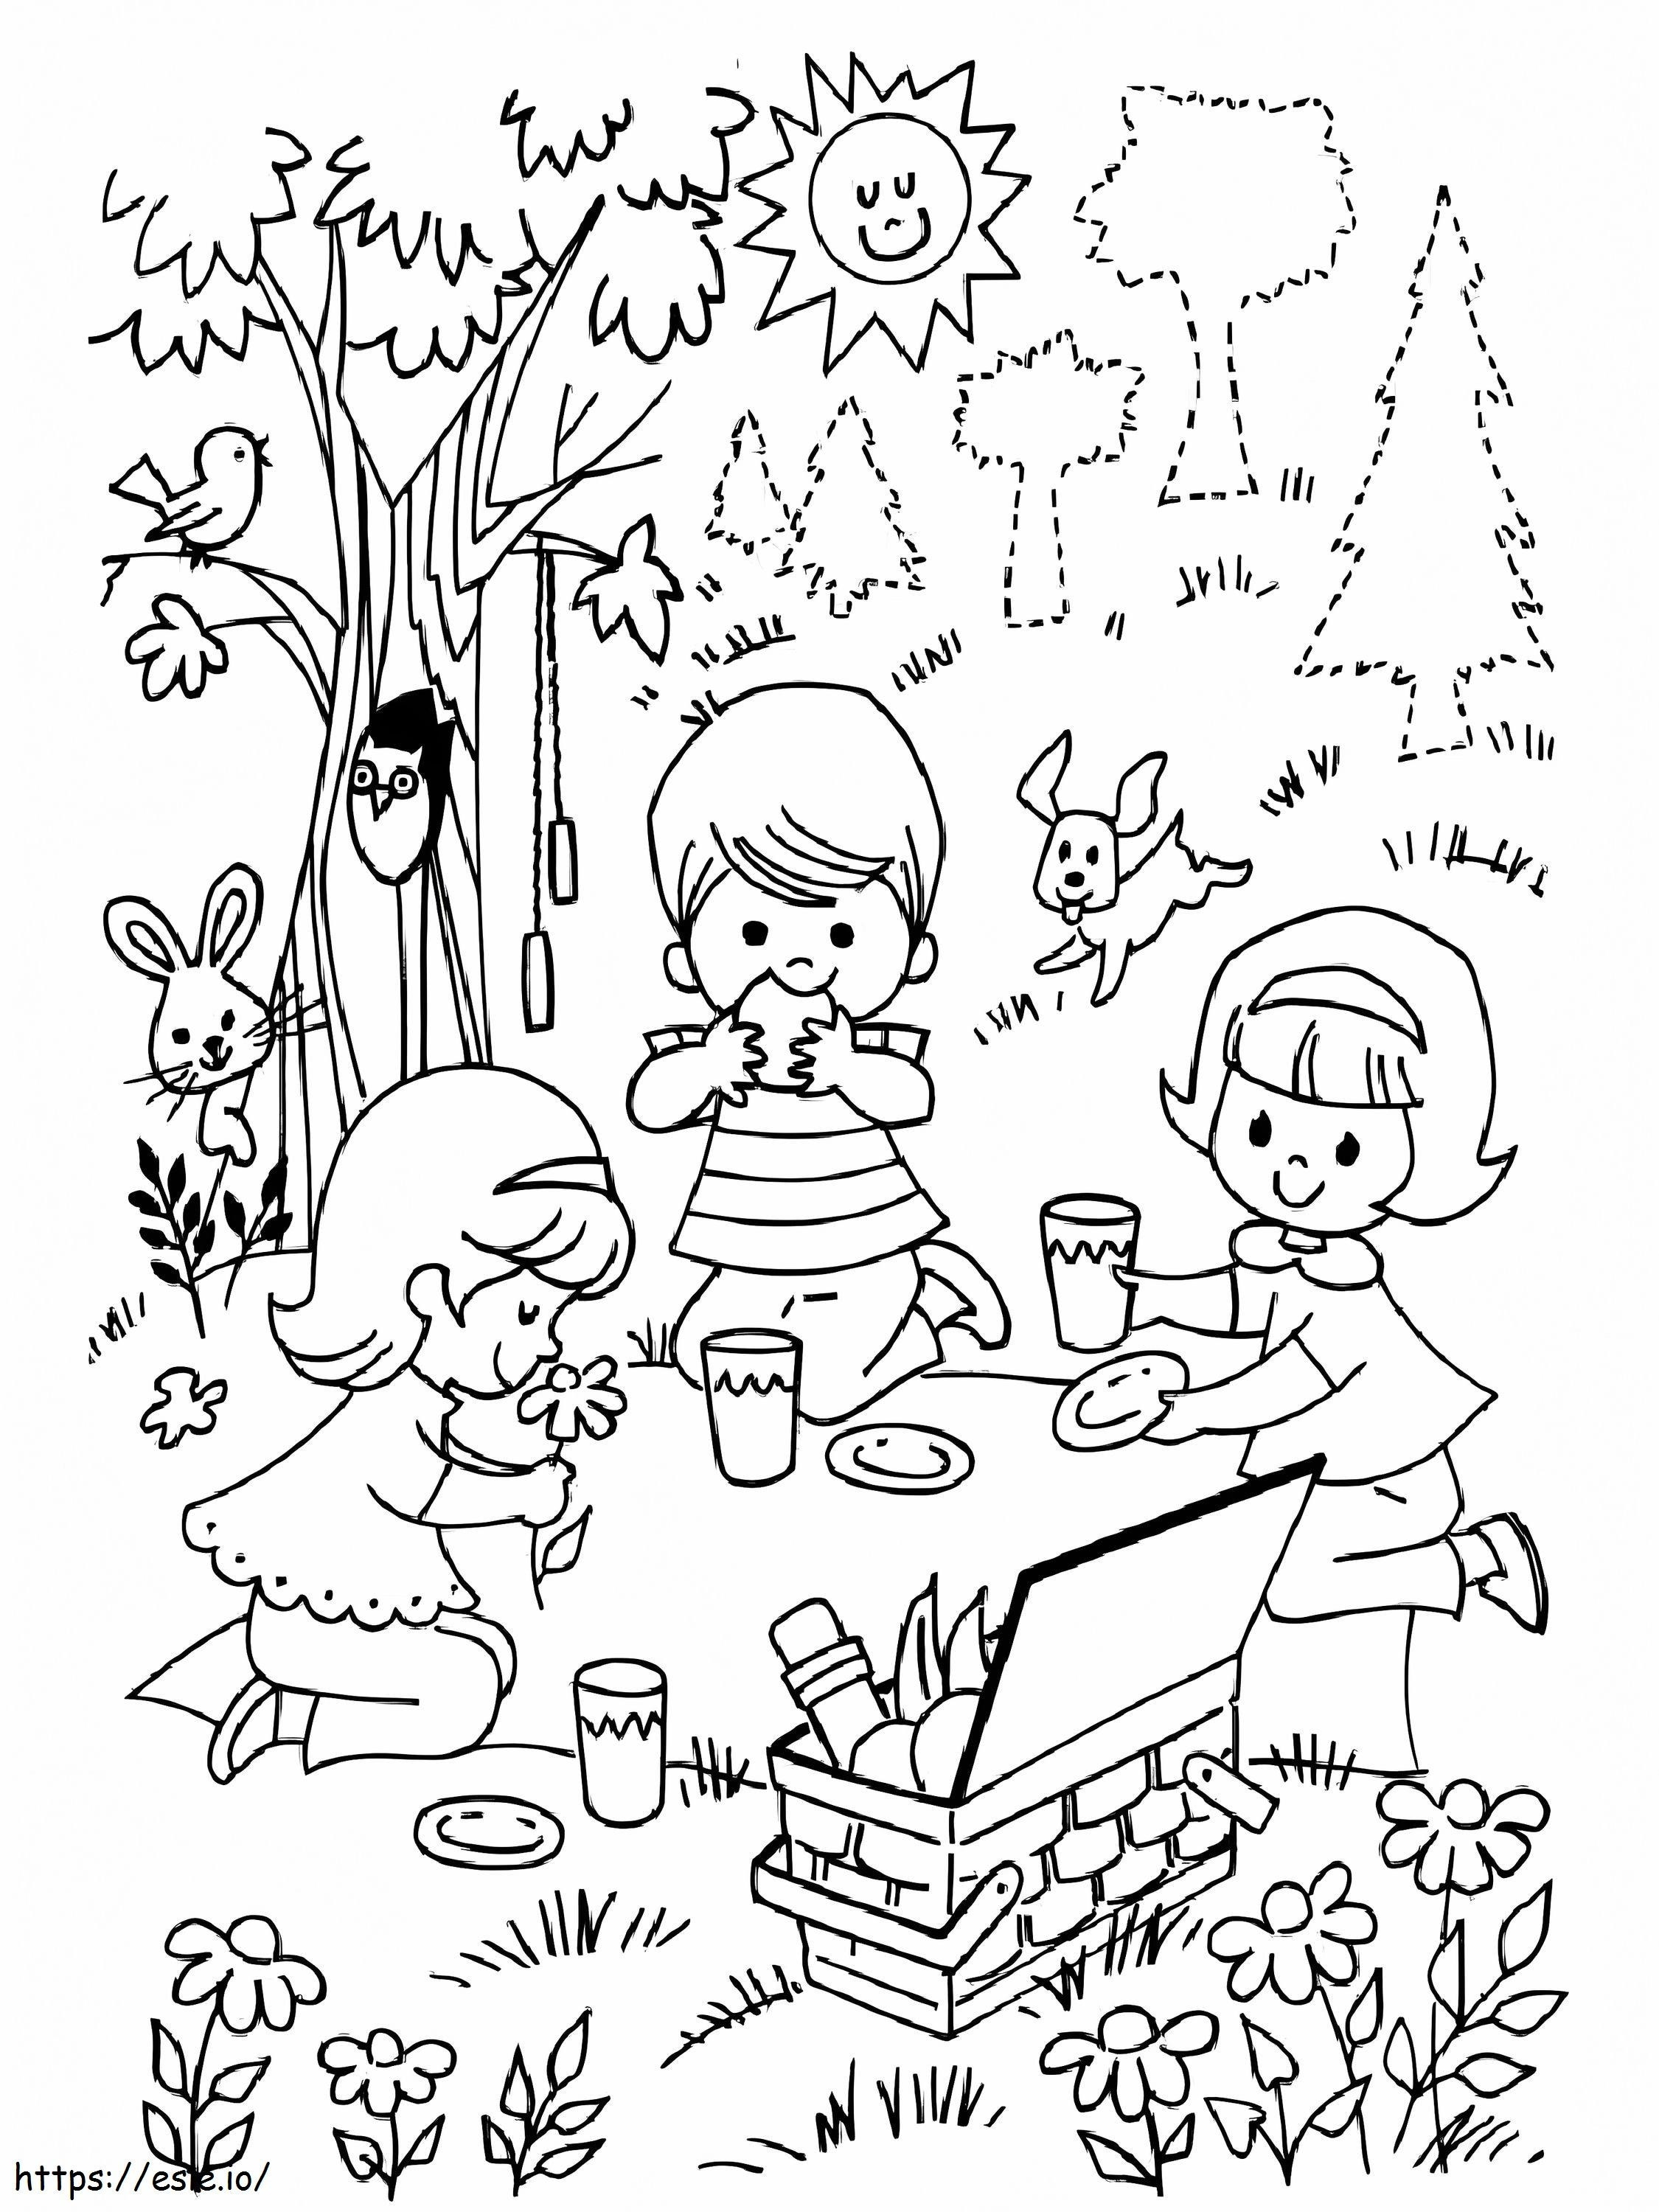 Little Kids In The Park coloring page